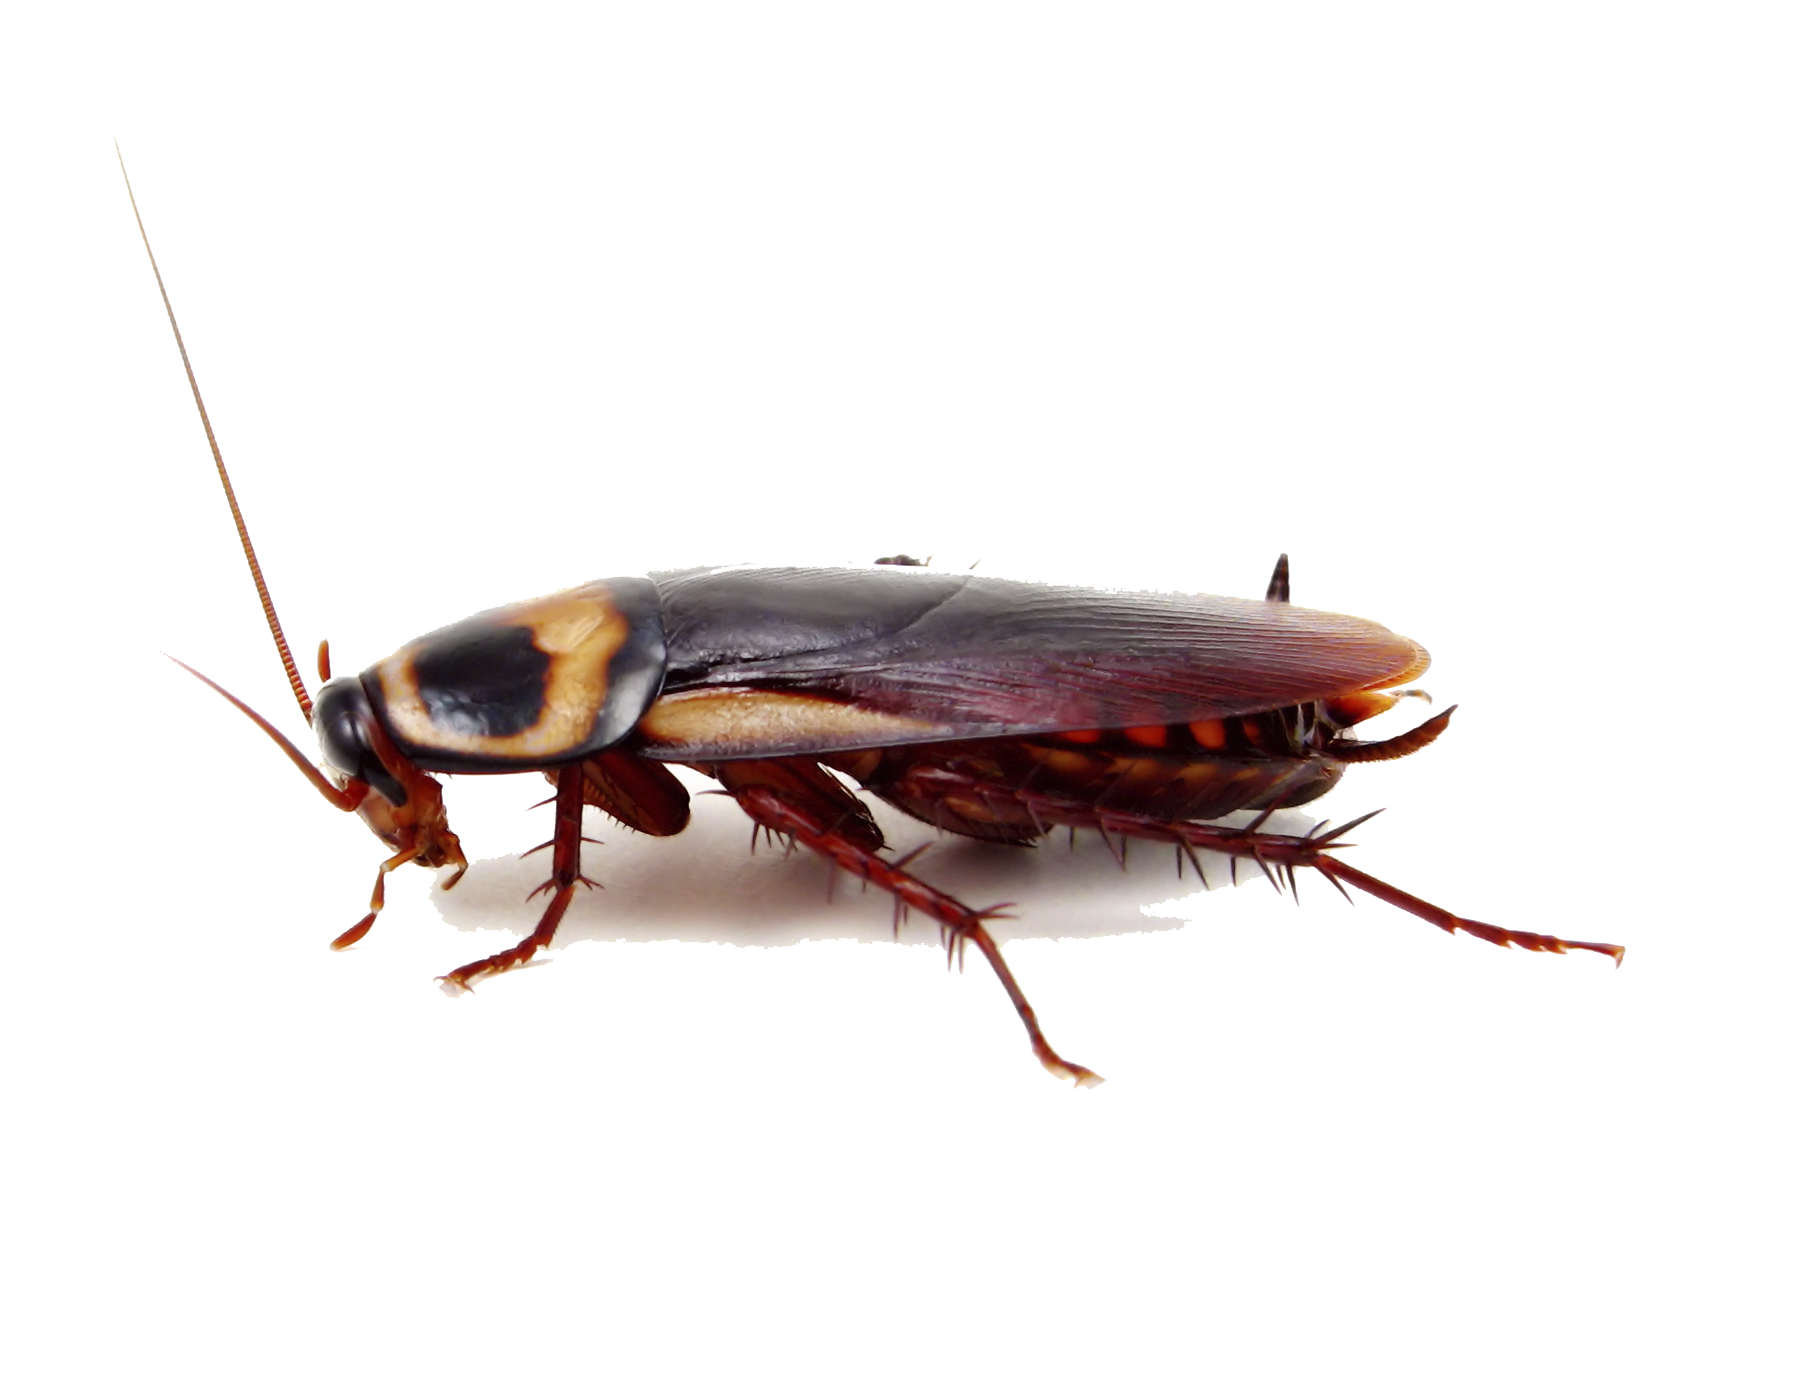 Cockroach PNG Image, Cockroach PNG - Free PNG